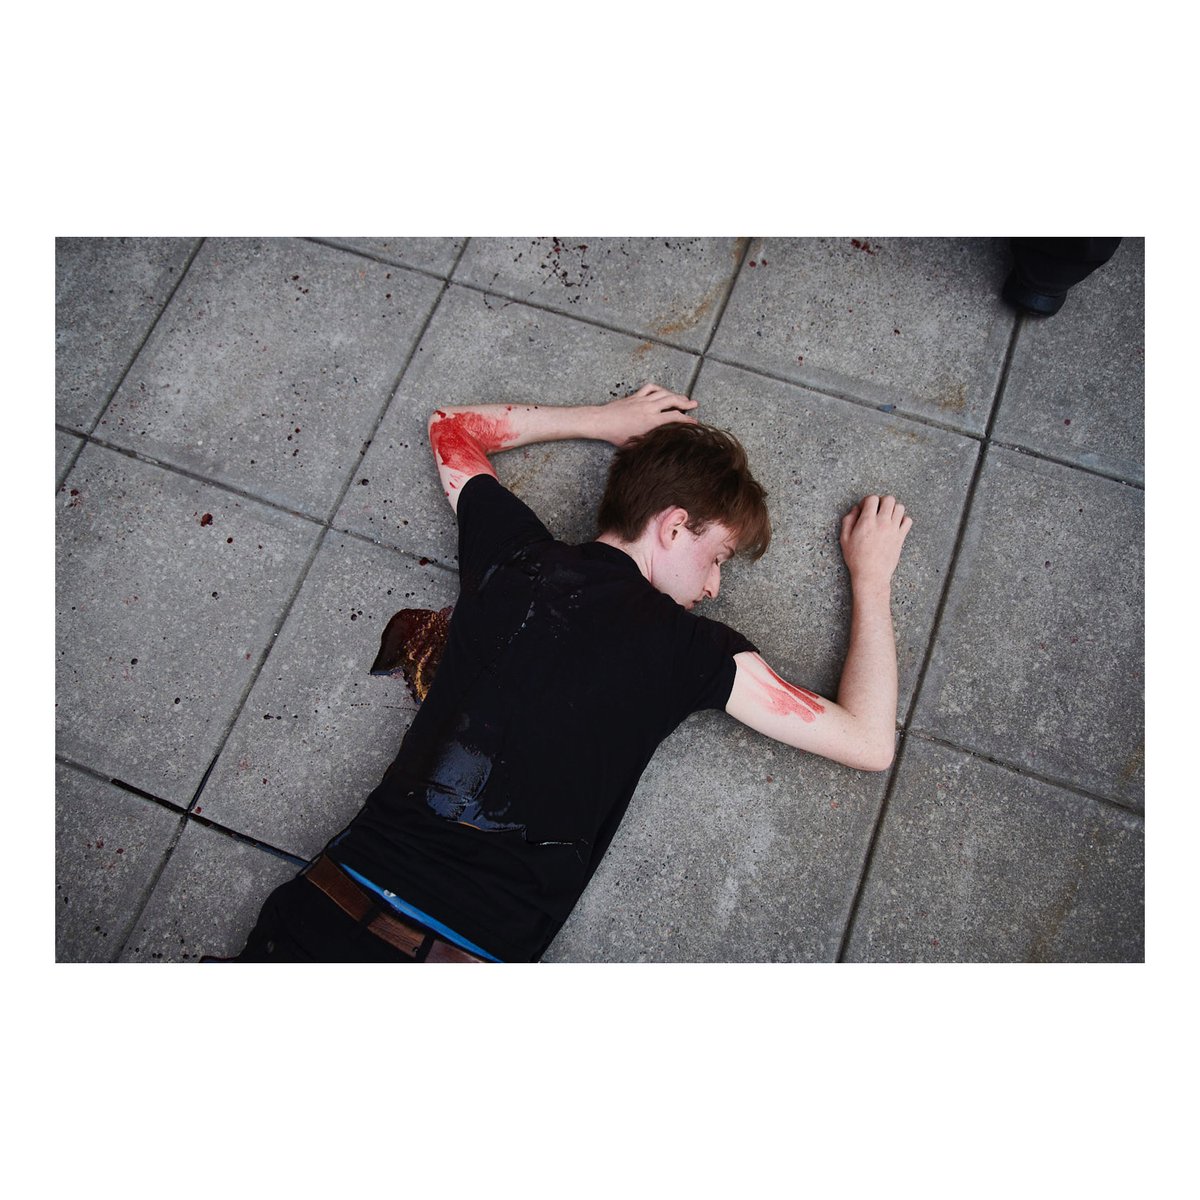 CONTENT NOTE: Fake blood @xr_nyc die-in Thu at Fed Courthouse at Foley Square, in protest of SCOTUS decision stripping @epagov of major tools to fight climate change.📷 for @xr_nyc. #ExtinctionRebellion #ClimateEmergency #ClimateActionNow #NoNewFossilFuels #ClimateJustice #SCOTUS